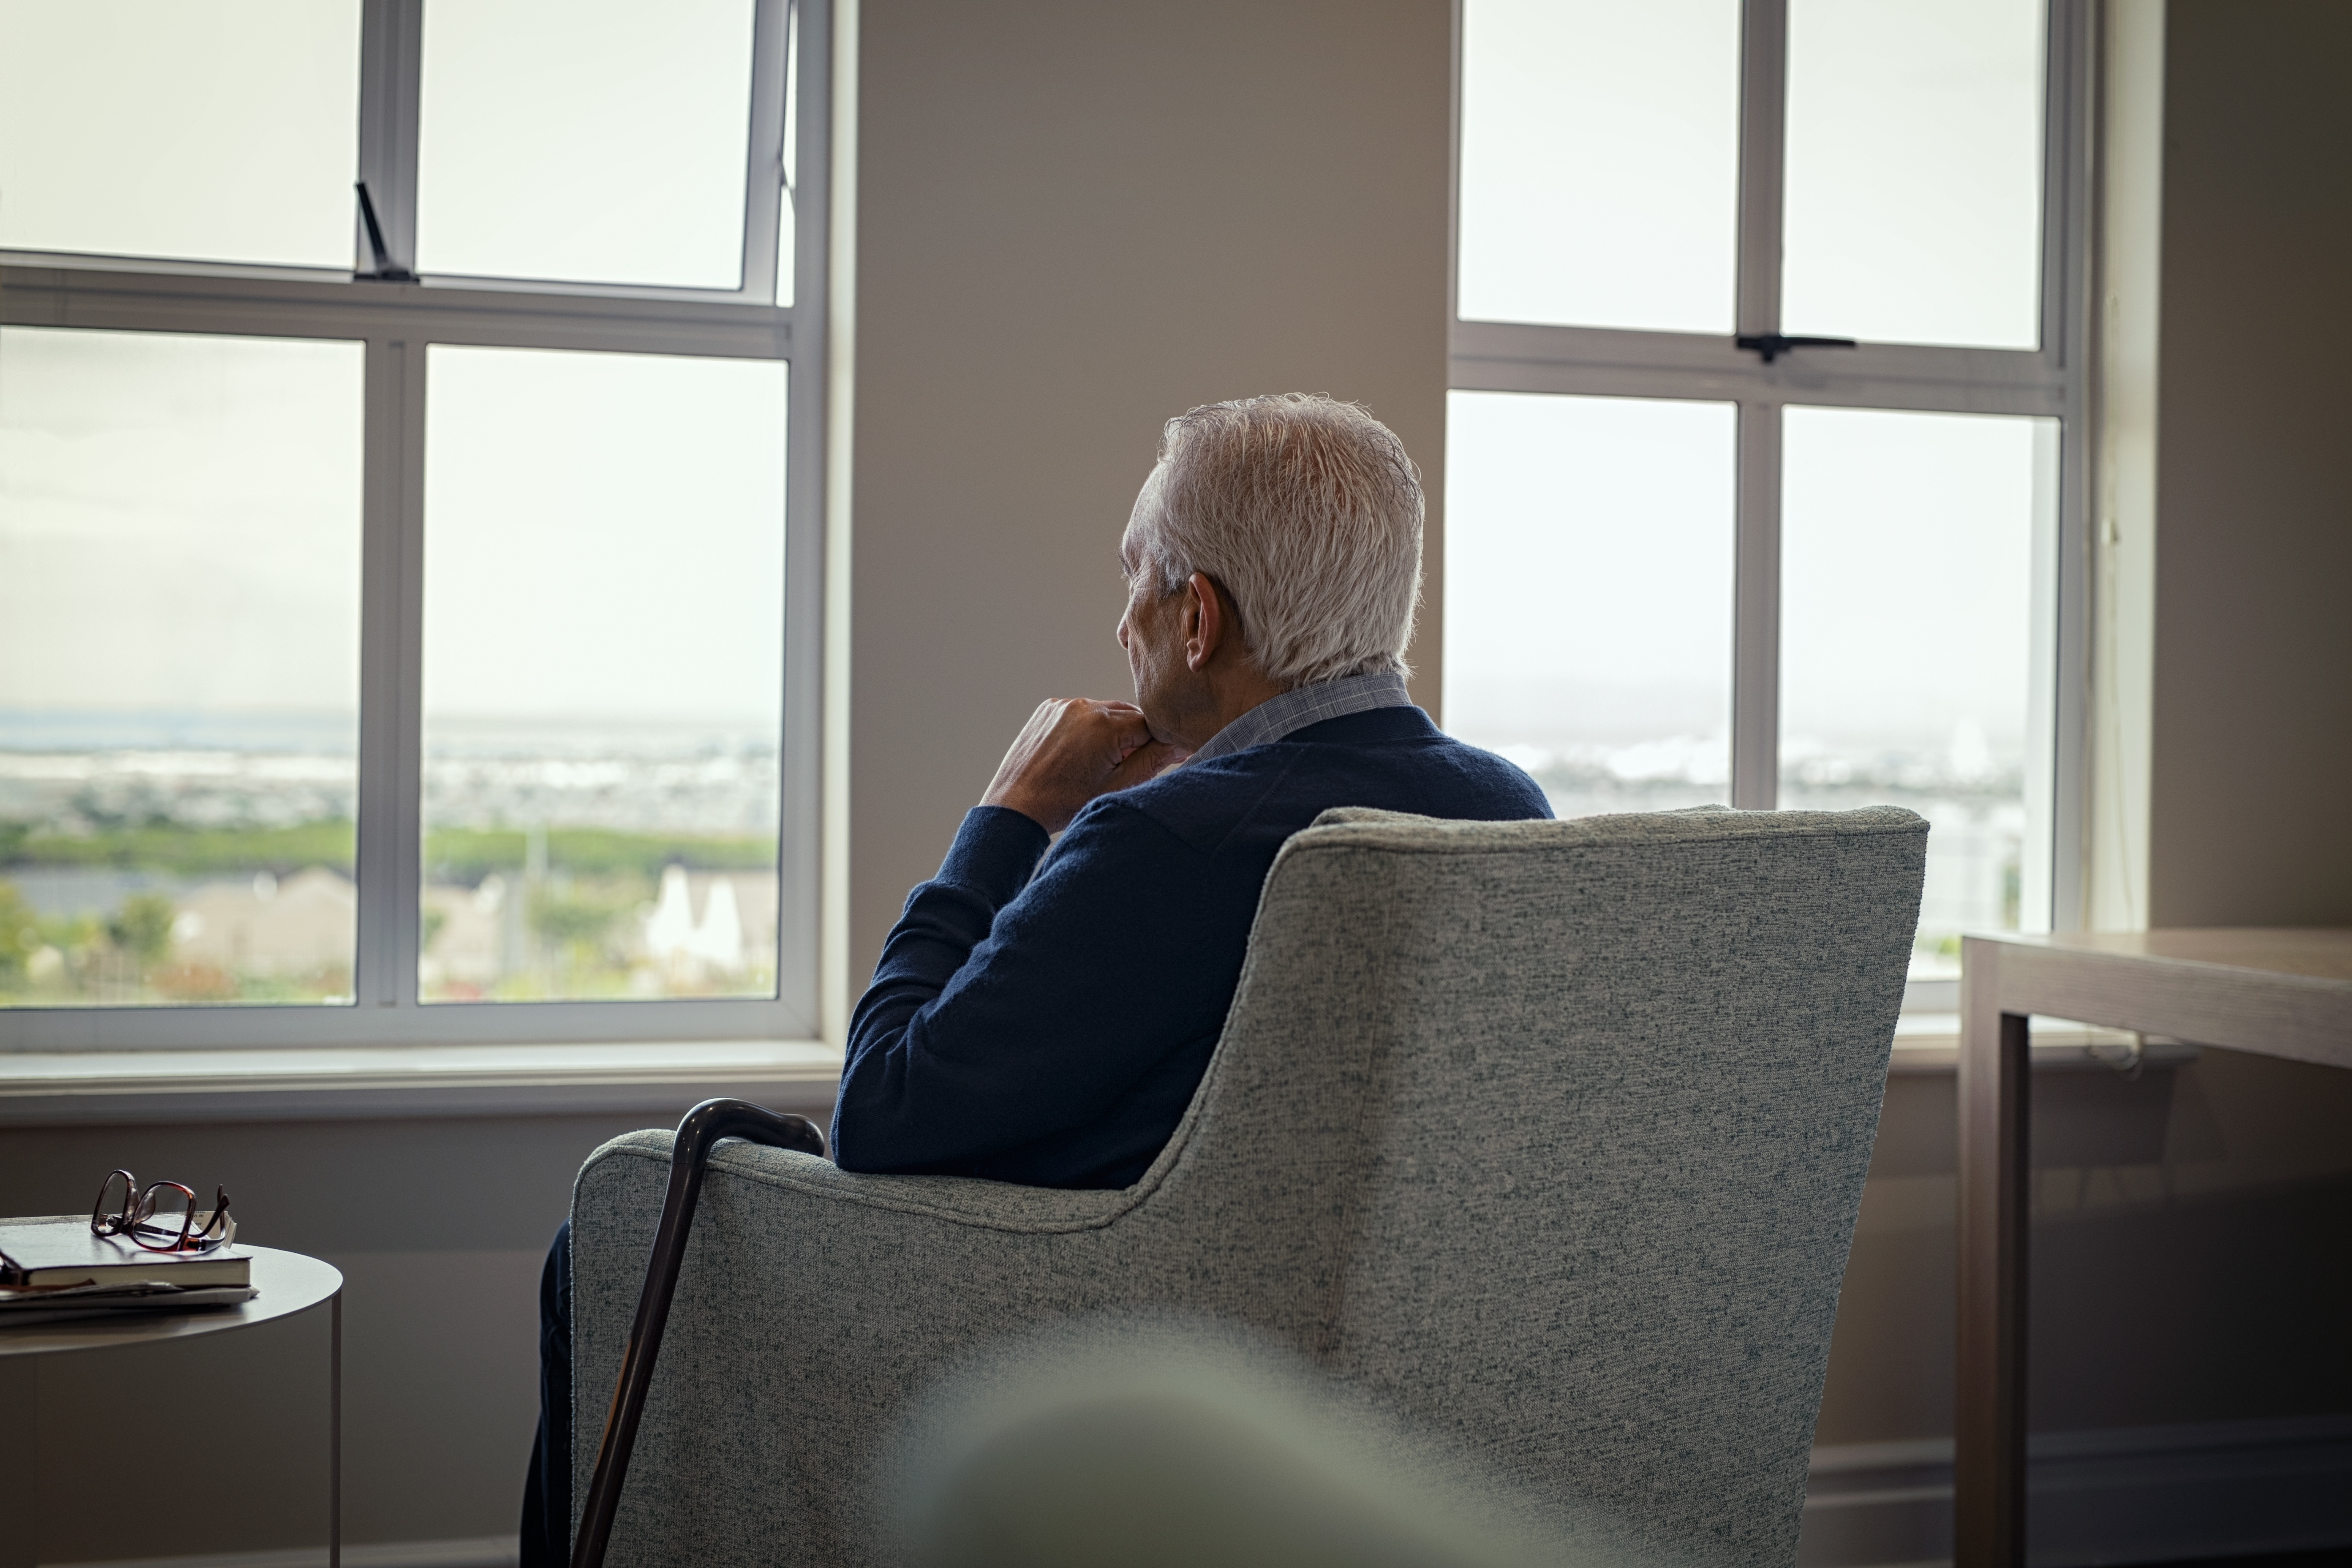 Photo of a man seated in an armchair in a nursing facility, seen from the back as he looks out the window